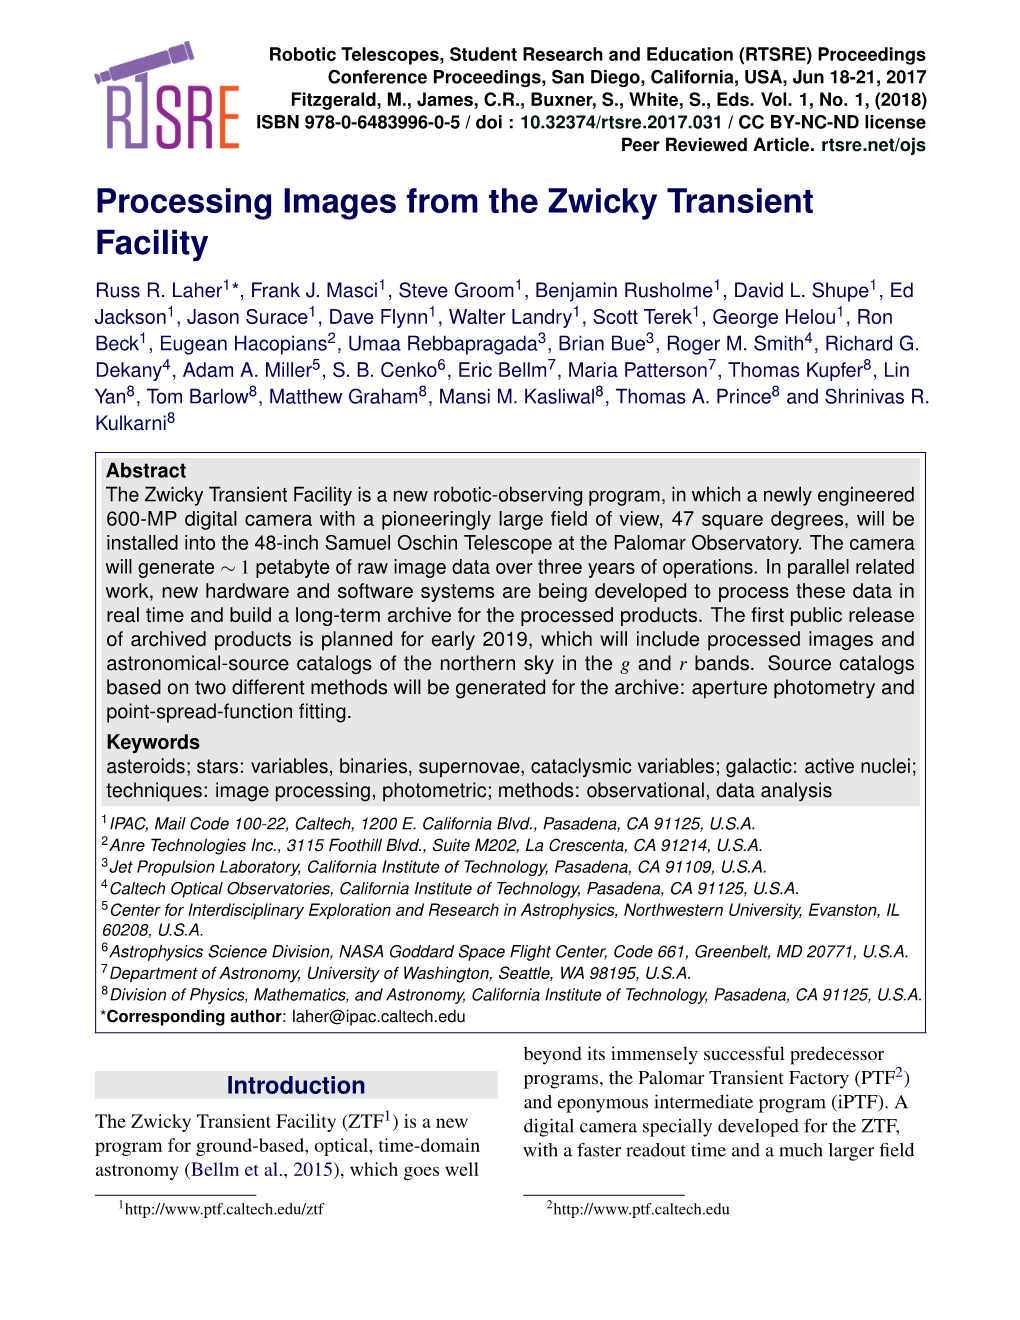 Processing Images from the Zwicky Transient Facility